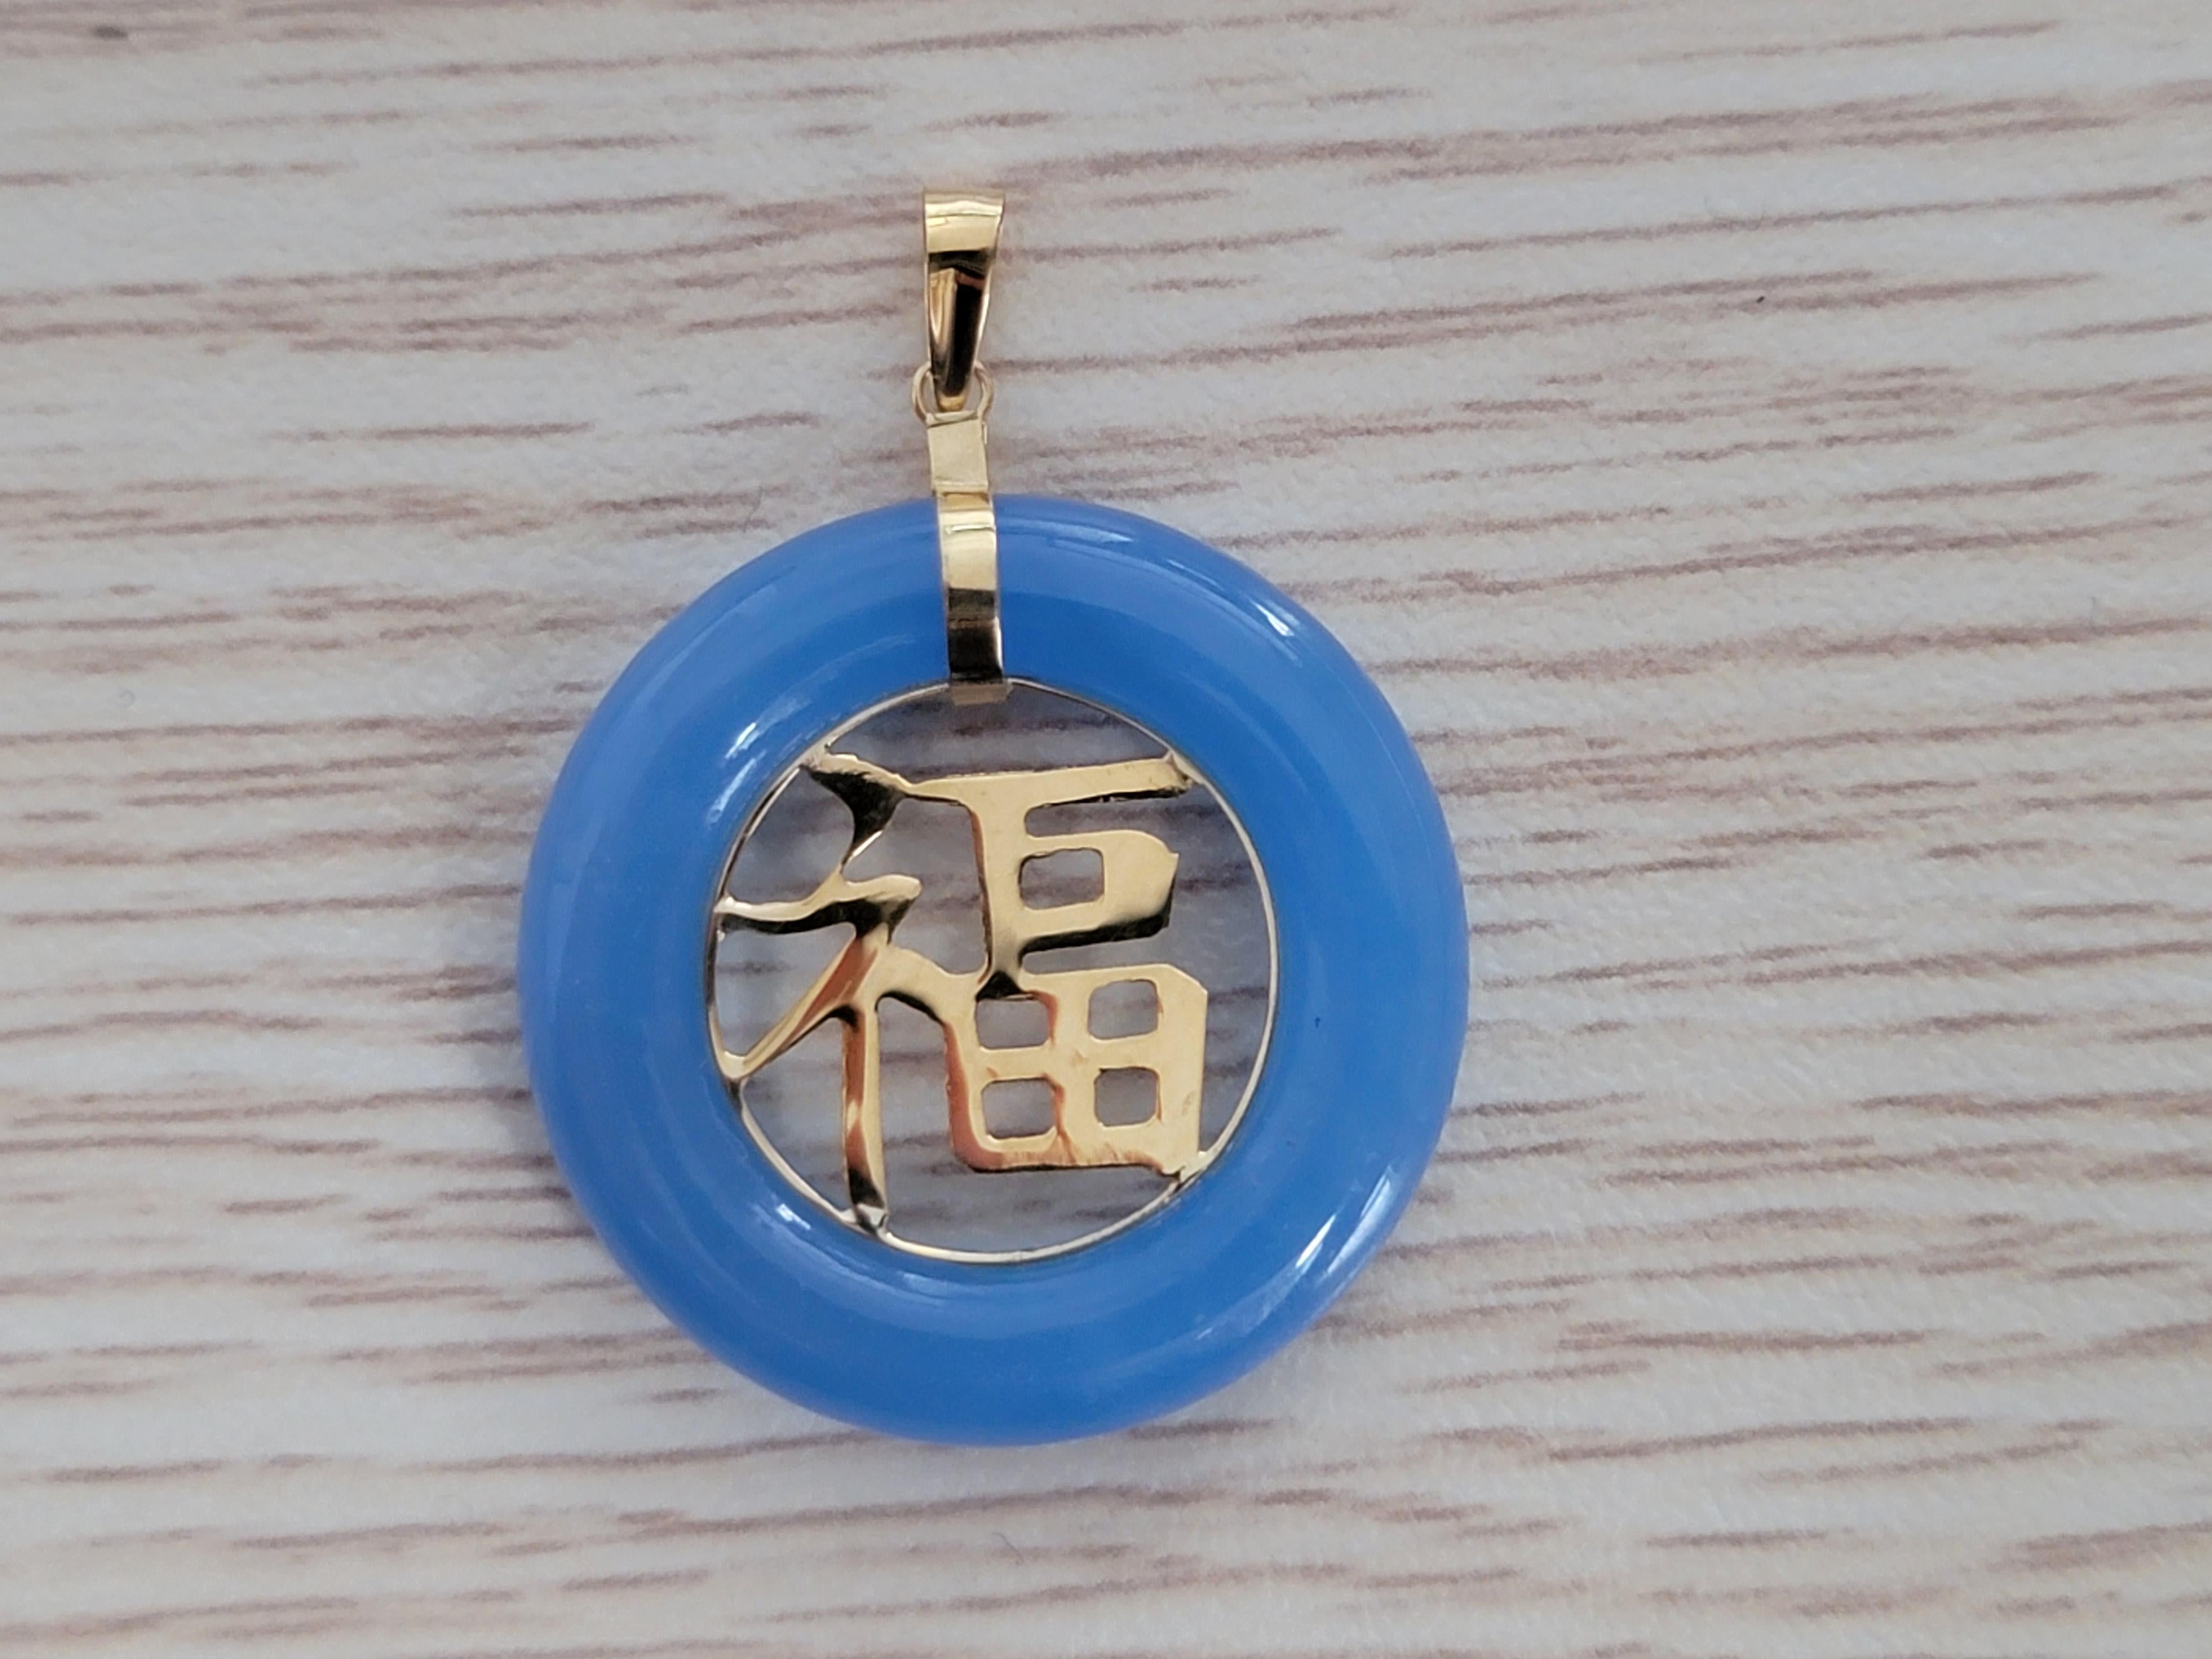 Cabochon Lantau Donut Azure Blue Jade Fortune Pendant with 14K Solid Yellow Gold For Sale